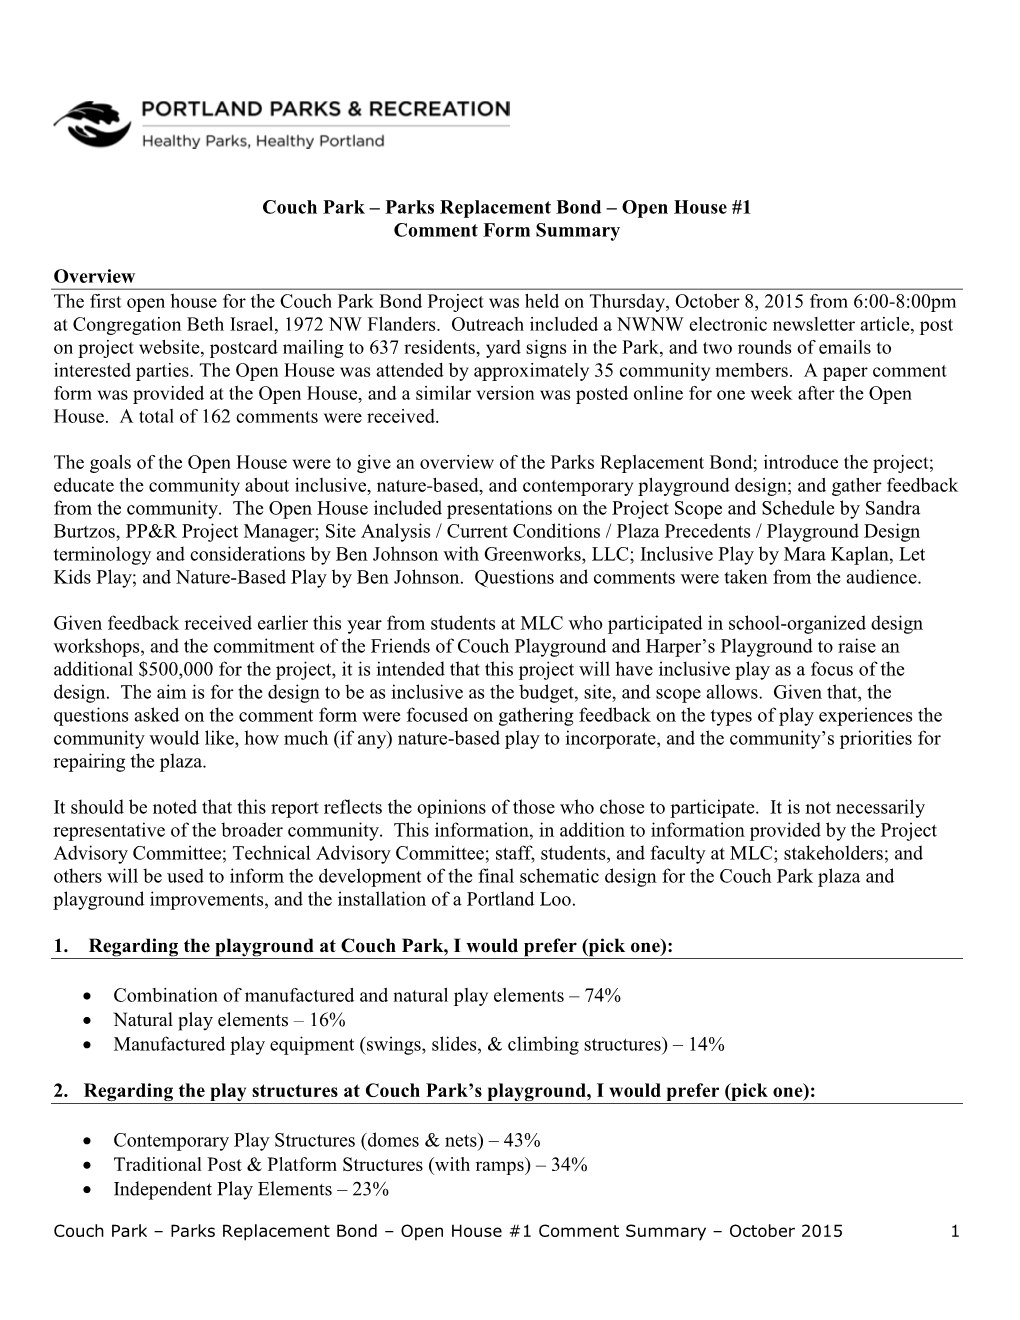 Couch Park – Parks Replacement Bond – Open House #1 Comment Form Summary